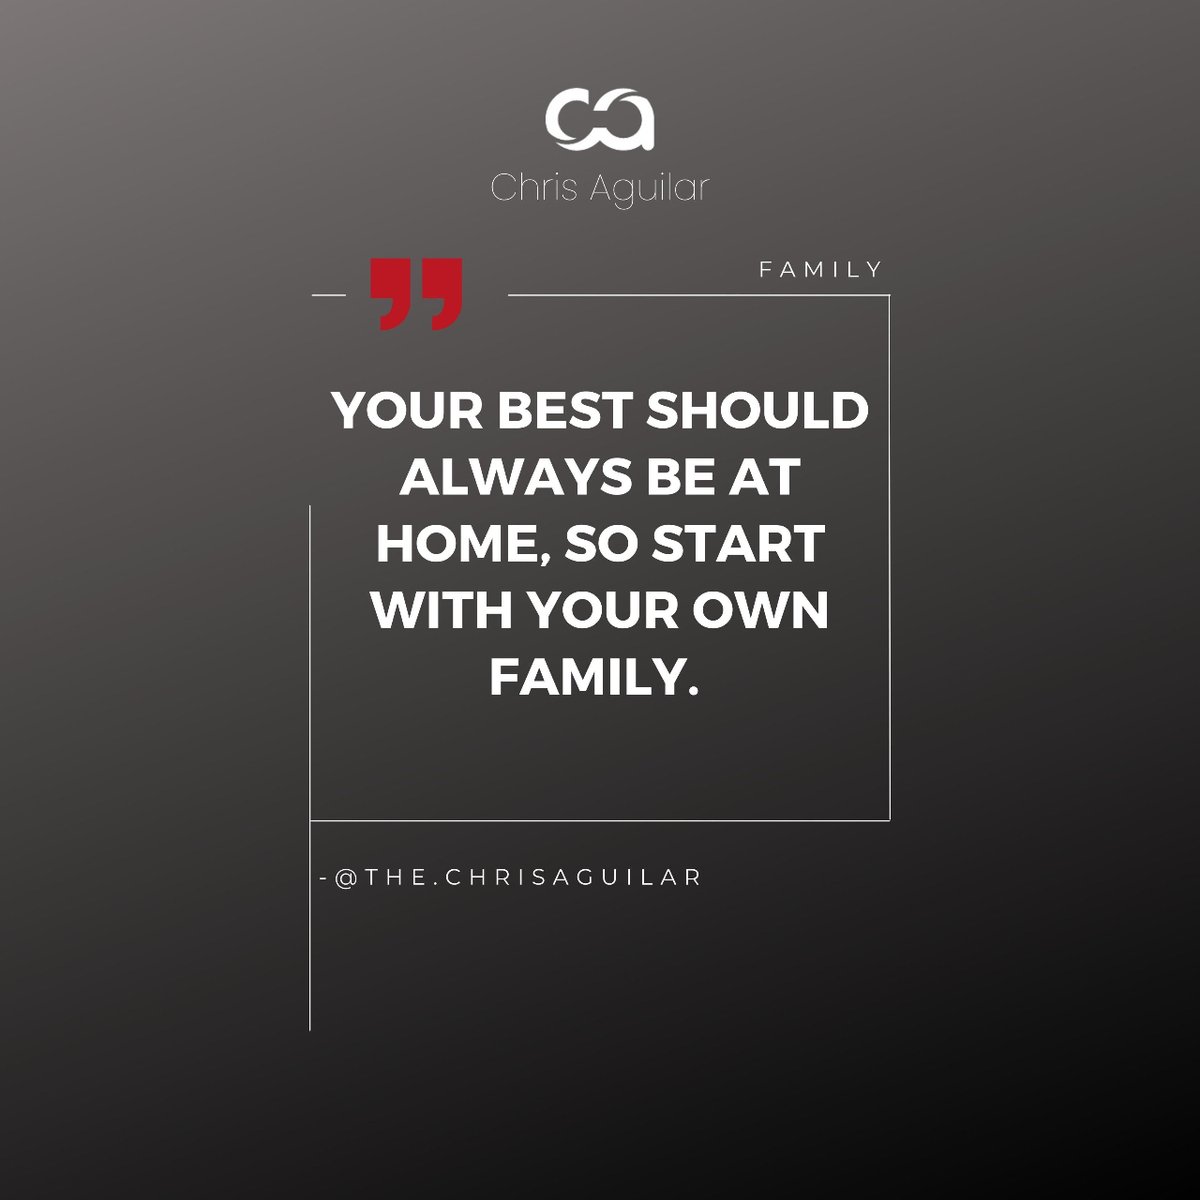 🏠👍🏻Your best should always be at home, so start with your own family 💯👨‍👩‍👧‍👦 #thechrisaguilar #realestateinvesting #tcaacademy #fixandflip #investment #realestate #business #profits #successs #quote #home #family